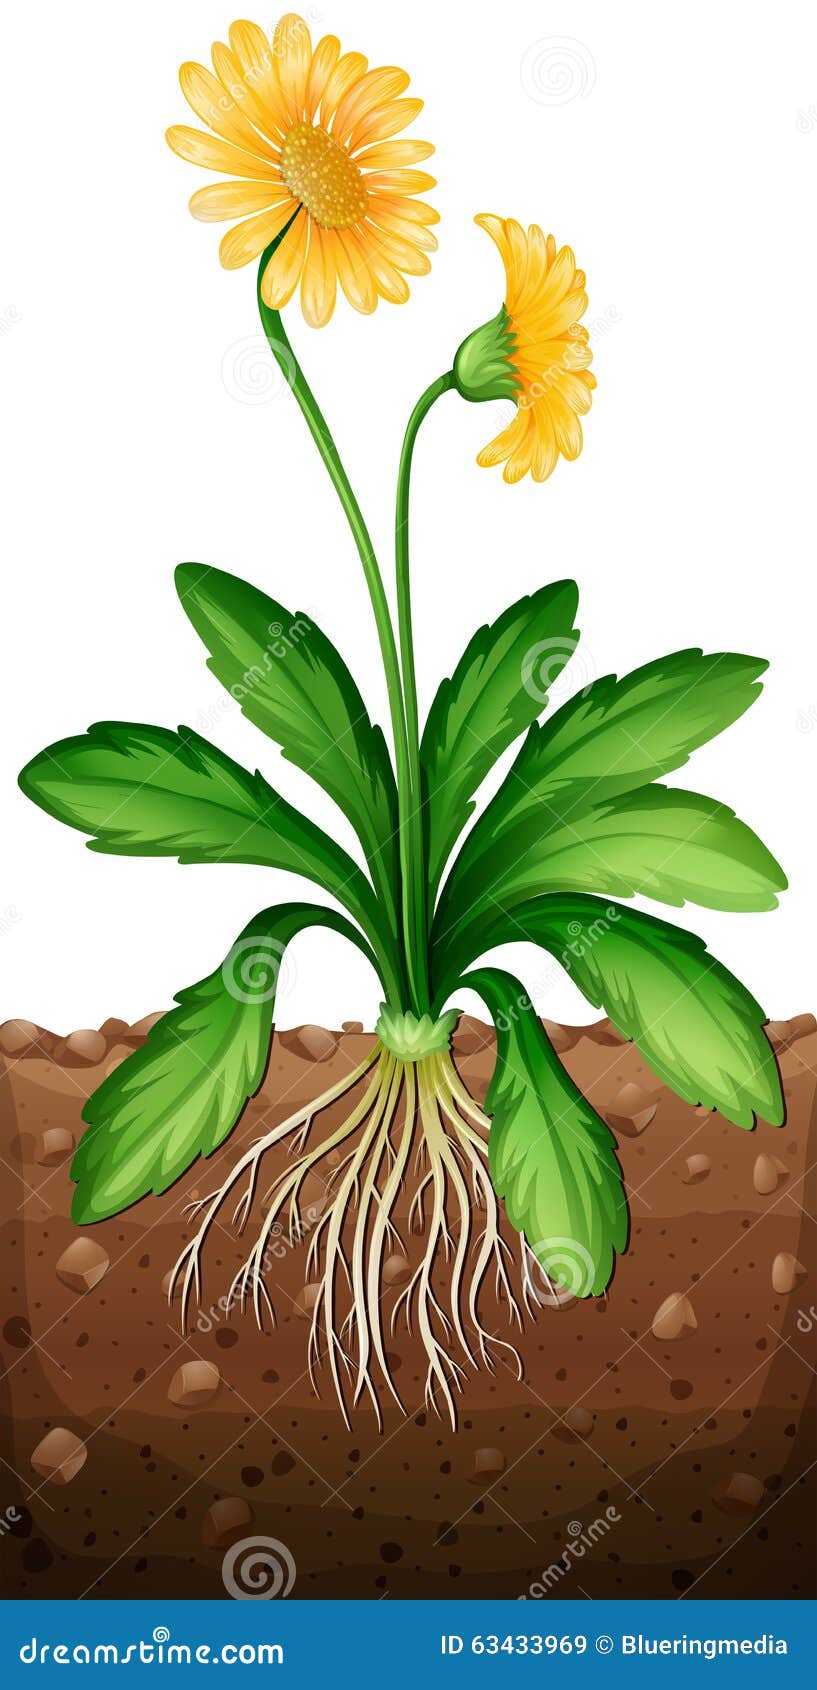 Yellow Daisy Plant In The Ground Stock Vector - Image: 63433969